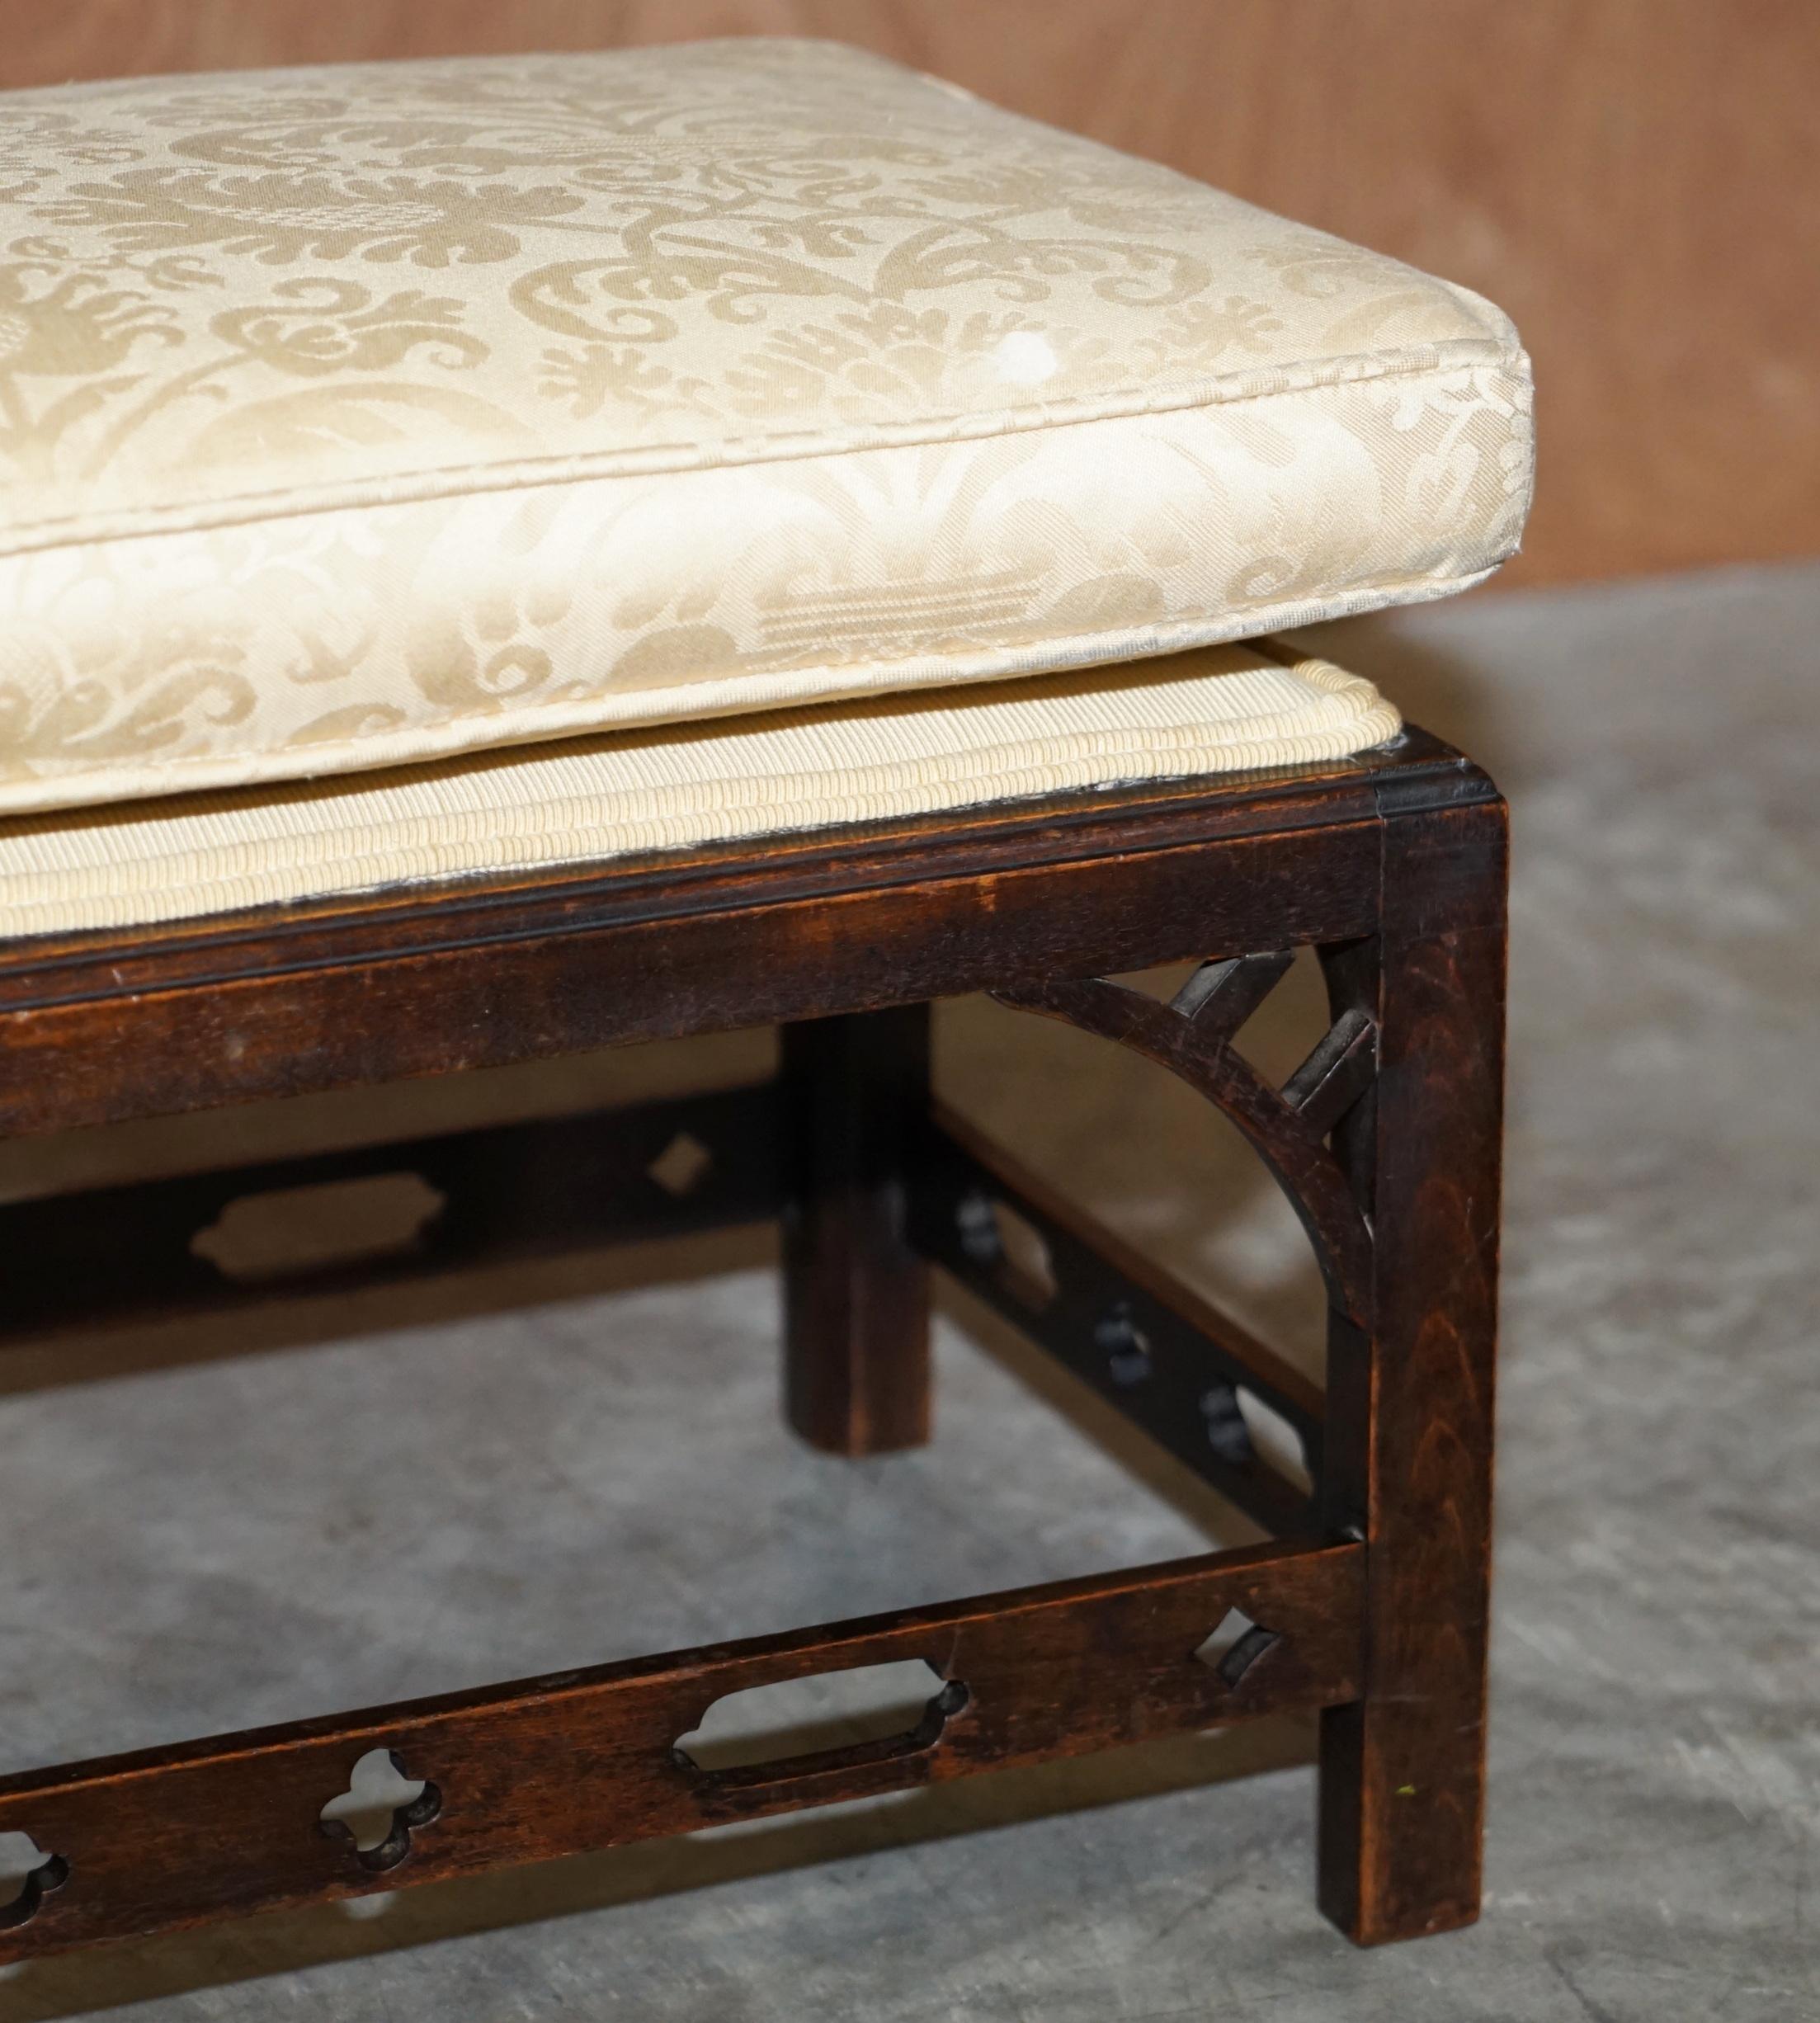 Upholstery Antique Georgian Thomas Chippendale Two Person Ottoman Footstool Lovely Carving